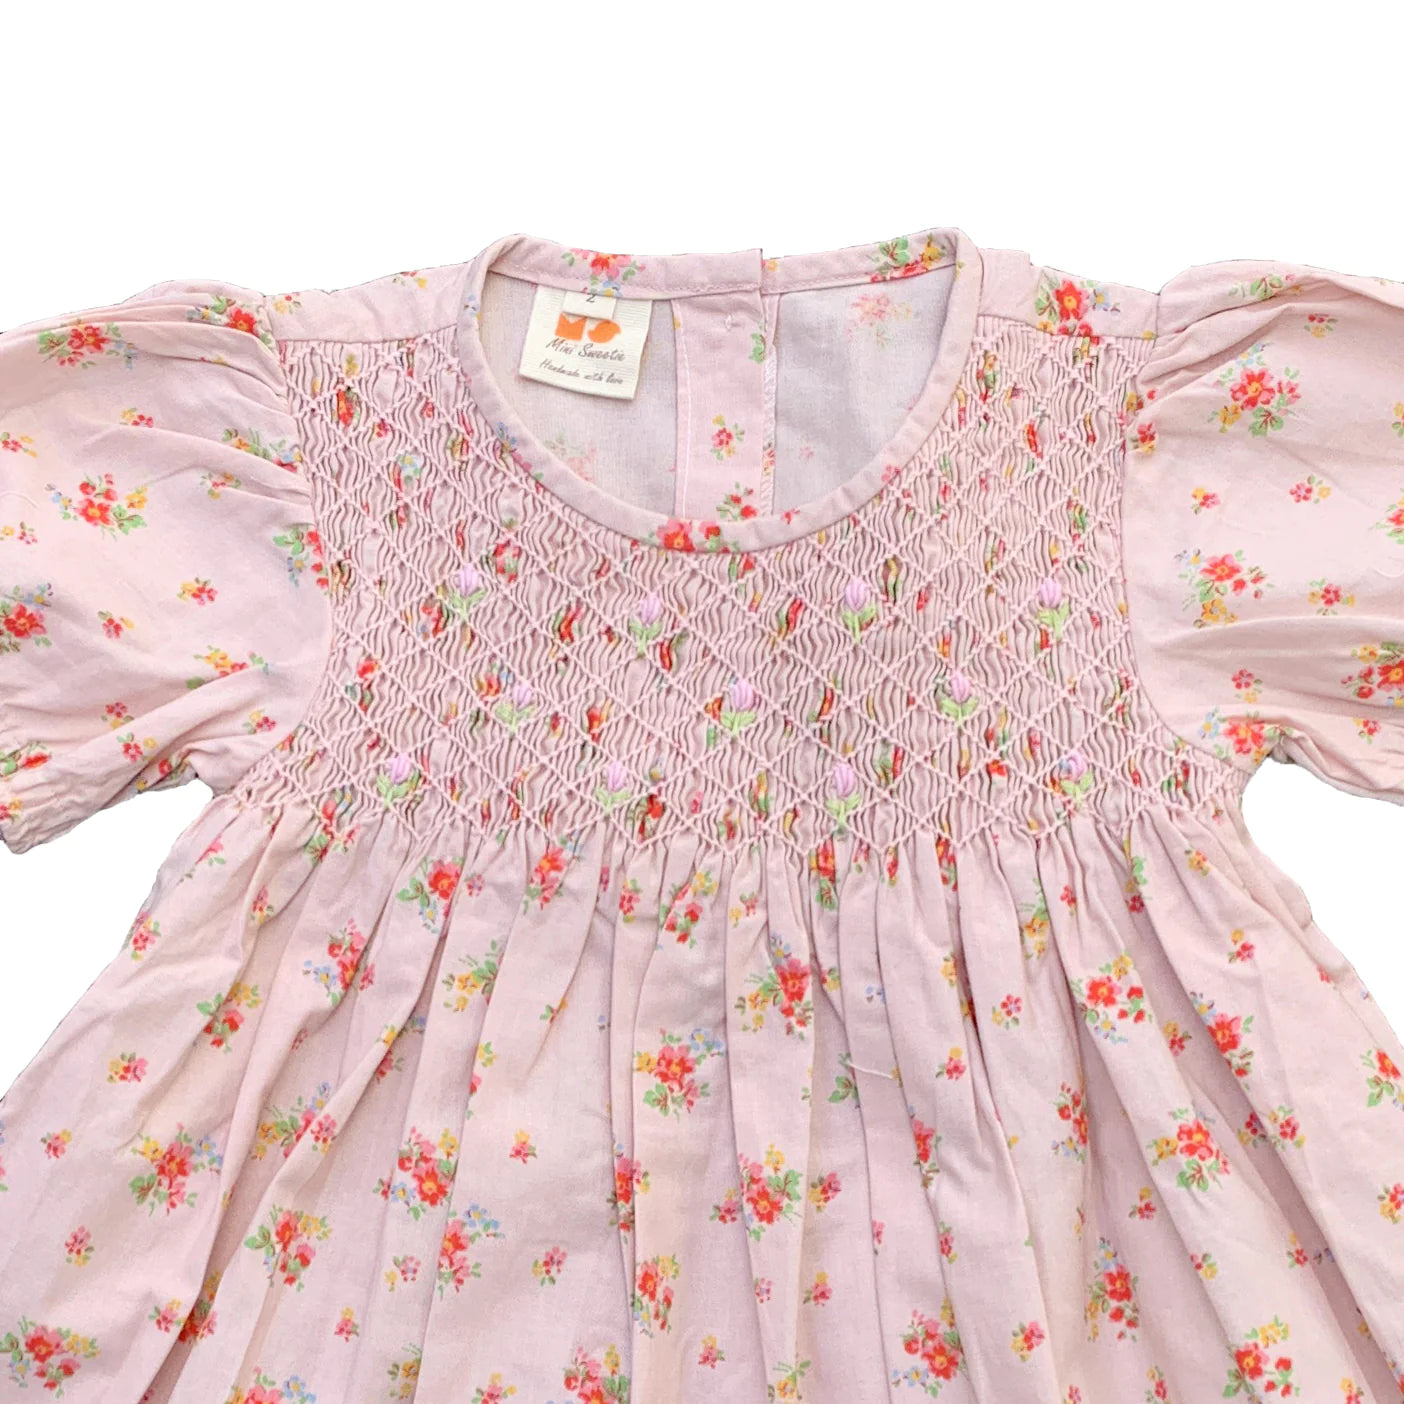 Blooms Apricot Smocked Dress Size 2